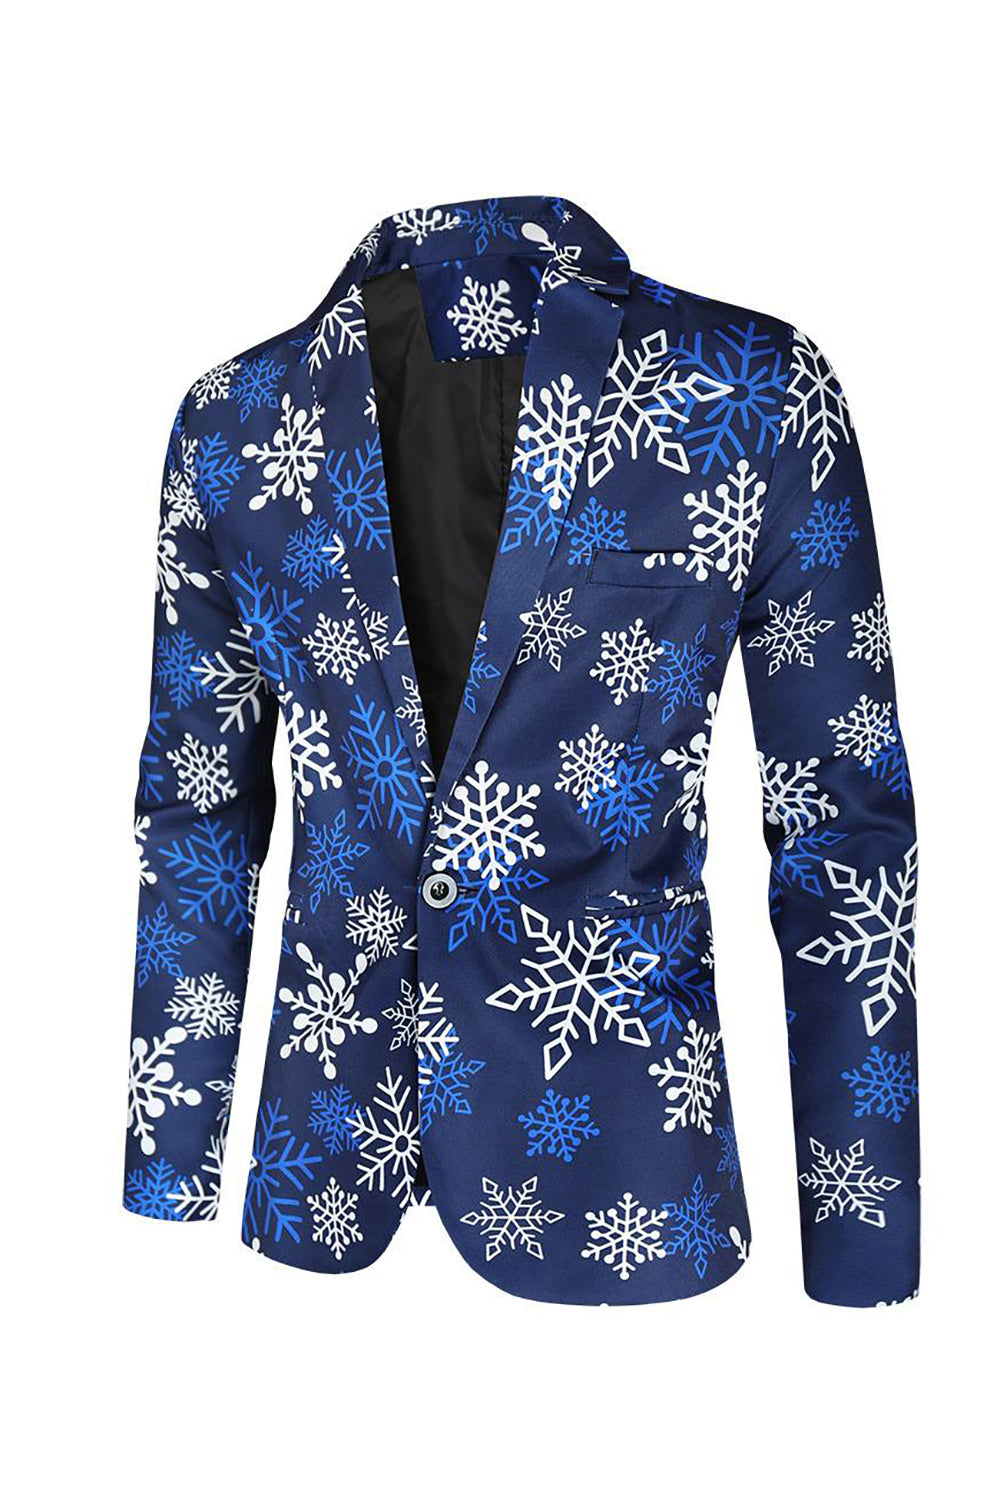 Blue Snowflake Printed 3 Piece Men's Christmas Party Suits